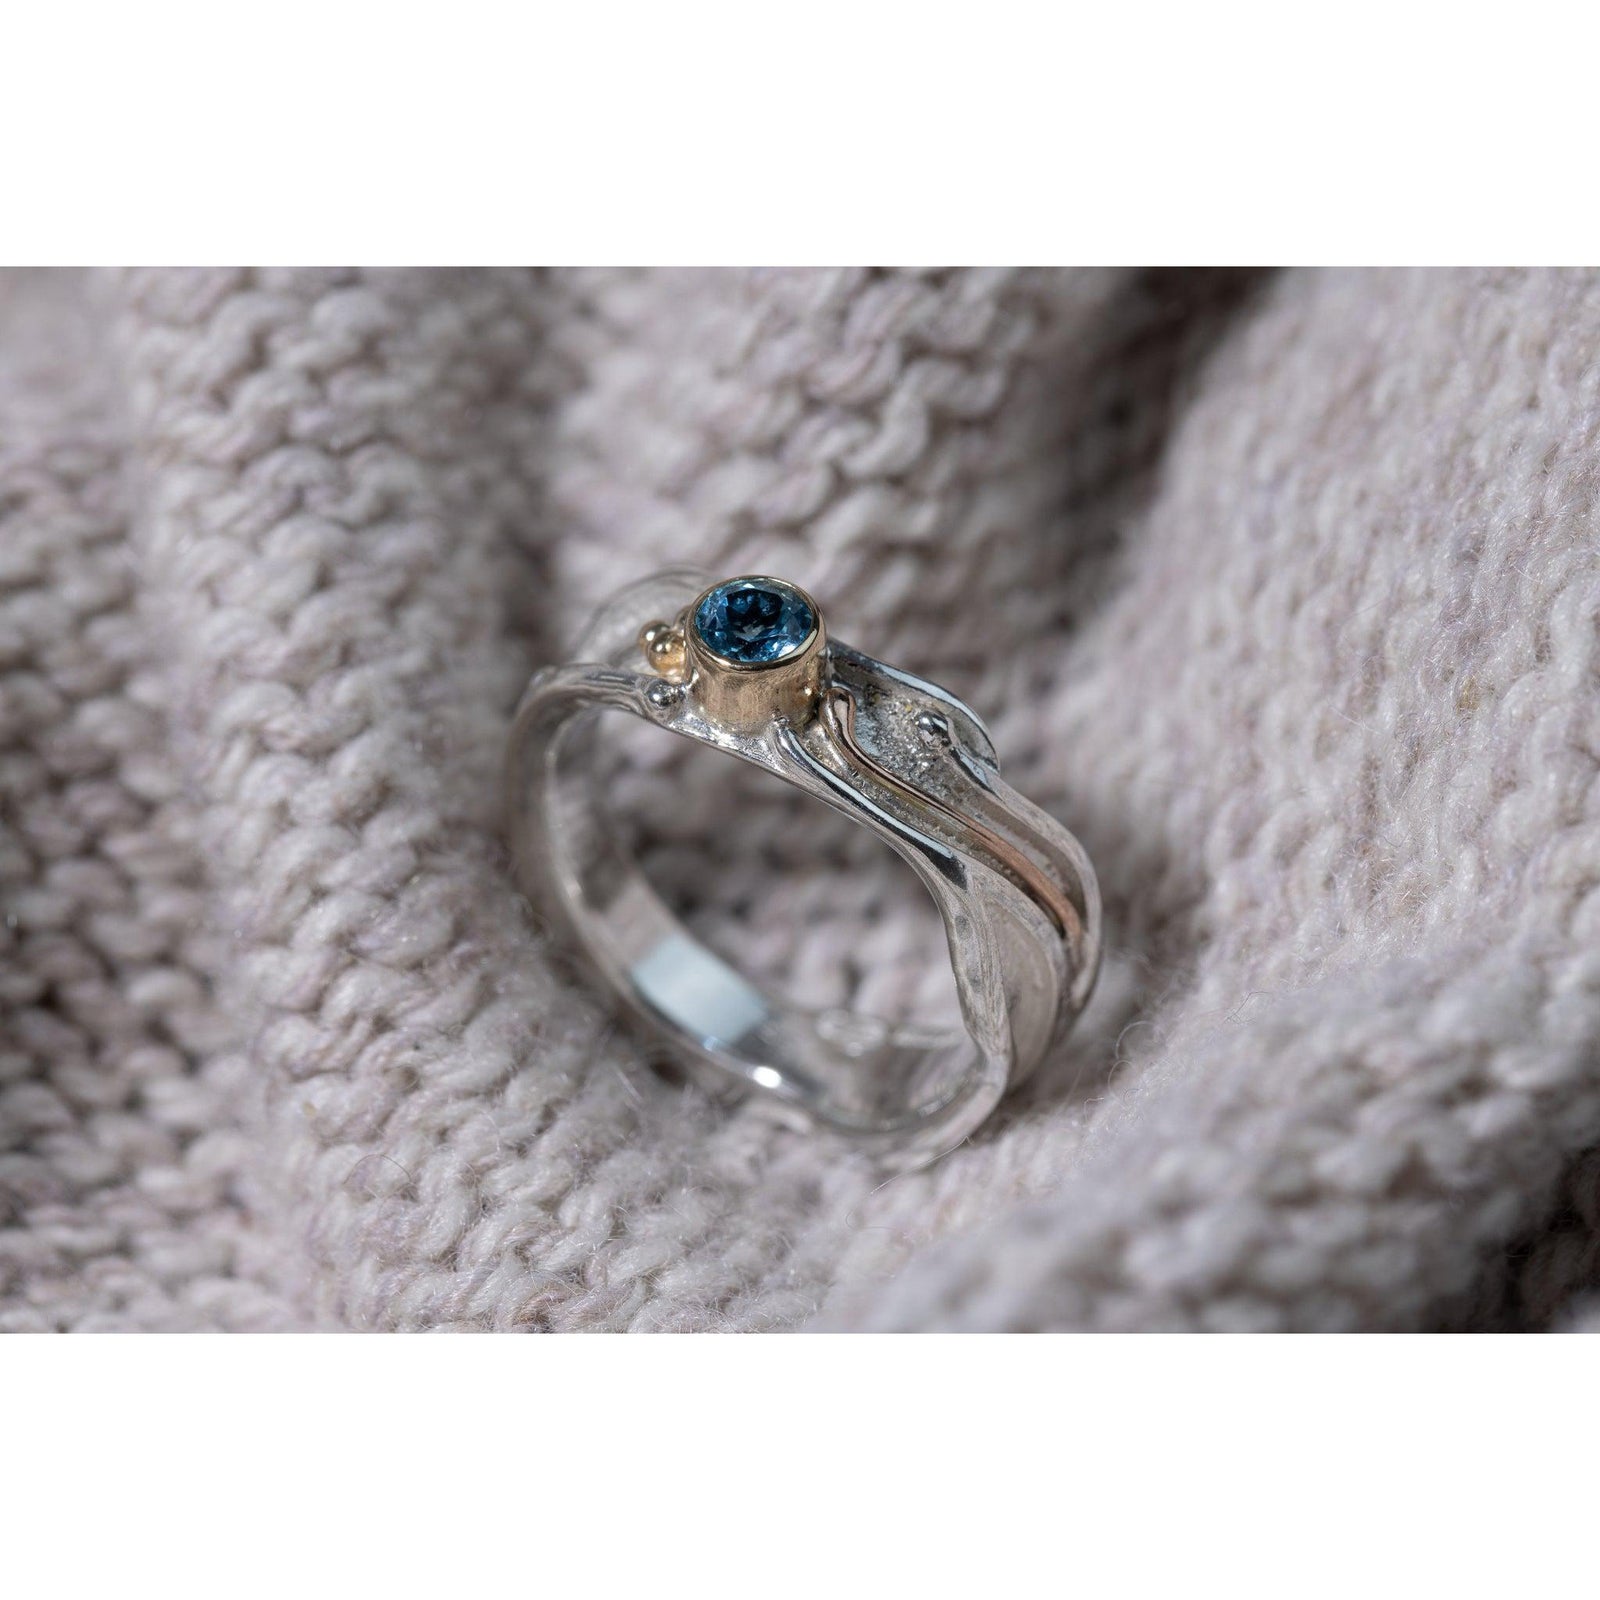 'LG64 - Silver Ring with 9ct Gold 4mm Swiss Blue Topaz Ring ' by Les Grimshaw, available at Padstow Gallery, Cornwall